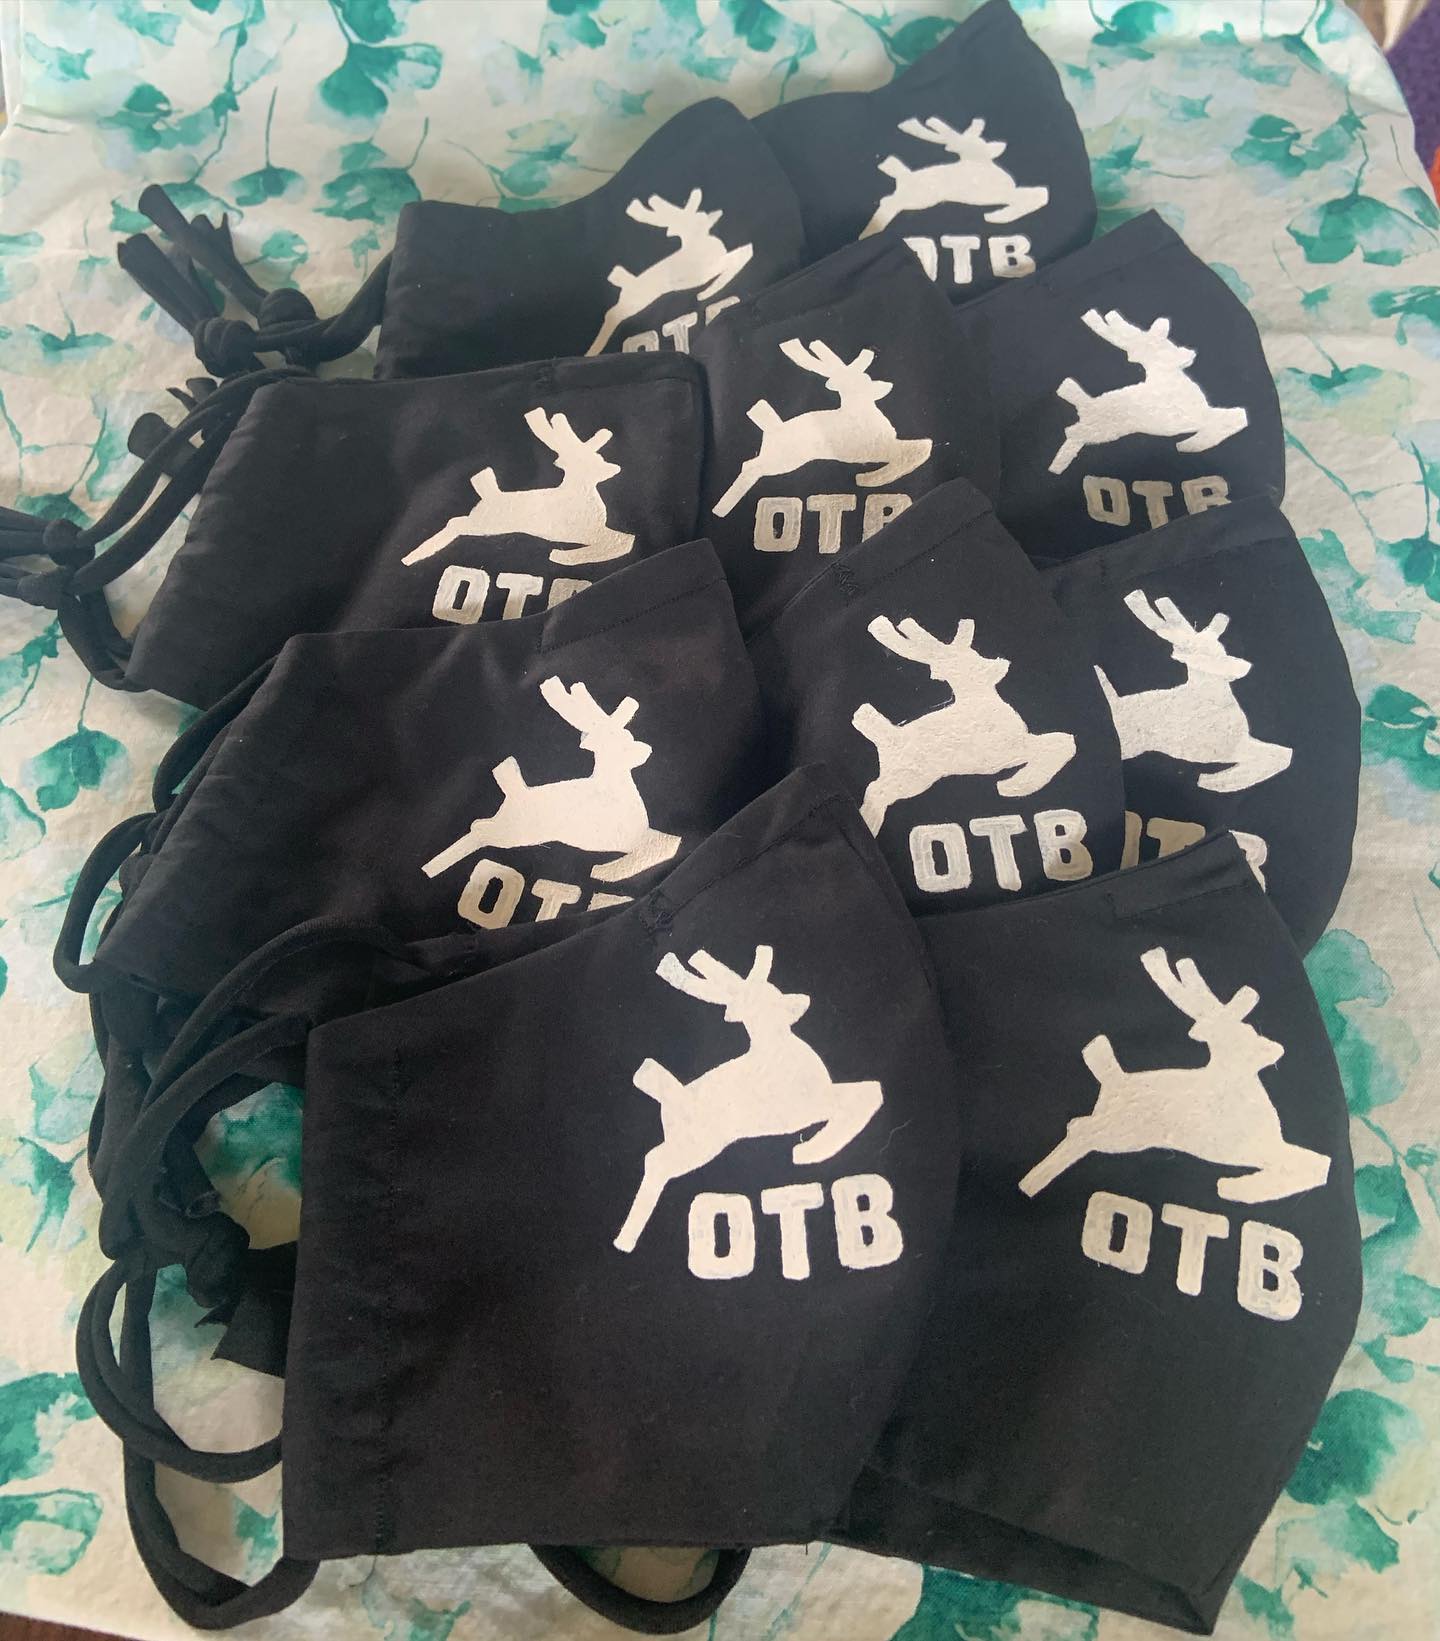 Old Town Brewing face masks will be for sale at the debut Drive-Thru Brewers Market. (image courtesy of Old Town Brewing)